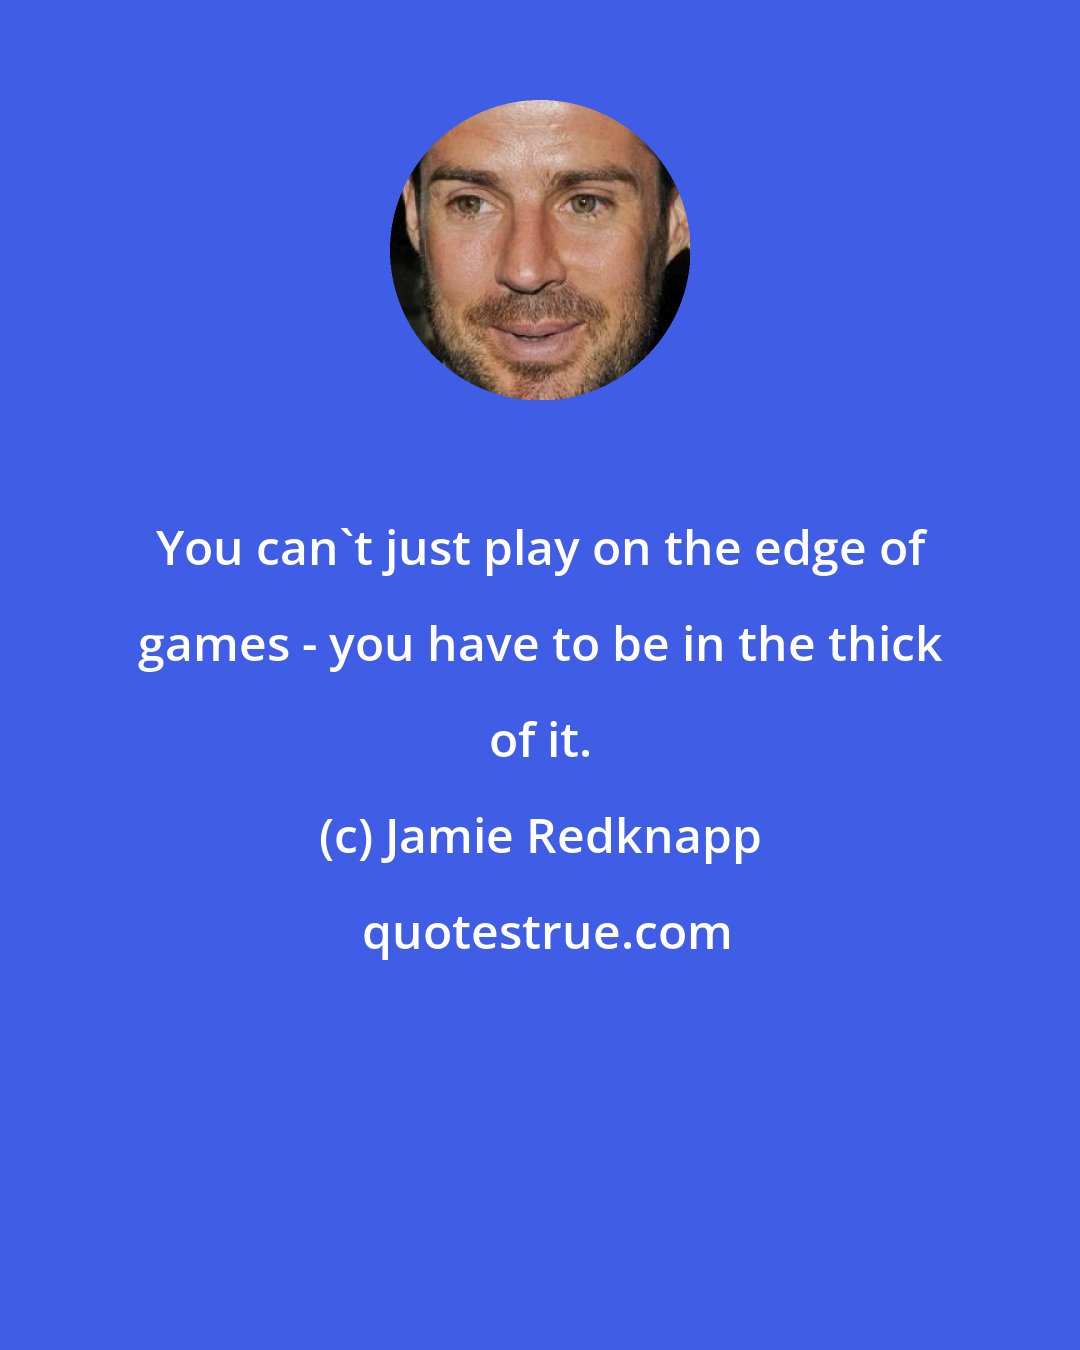 Jamie Redknapp: You can't just play on the edge of games - you have to be in the thick of it.